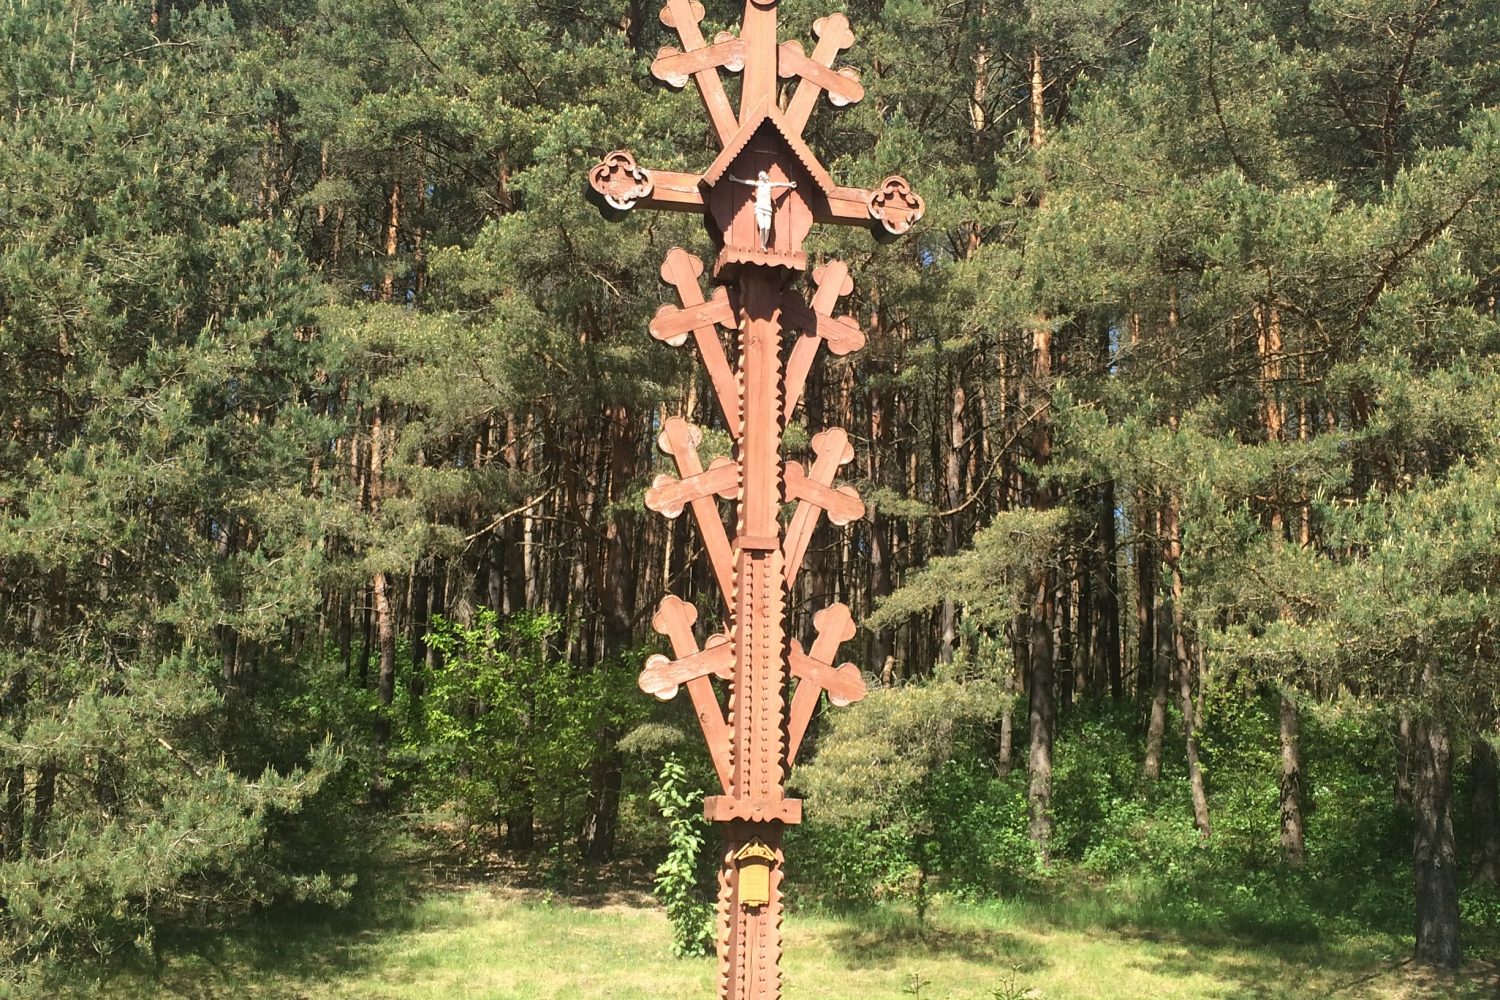 partisans park from vilnius: private tour to the hill of crosses